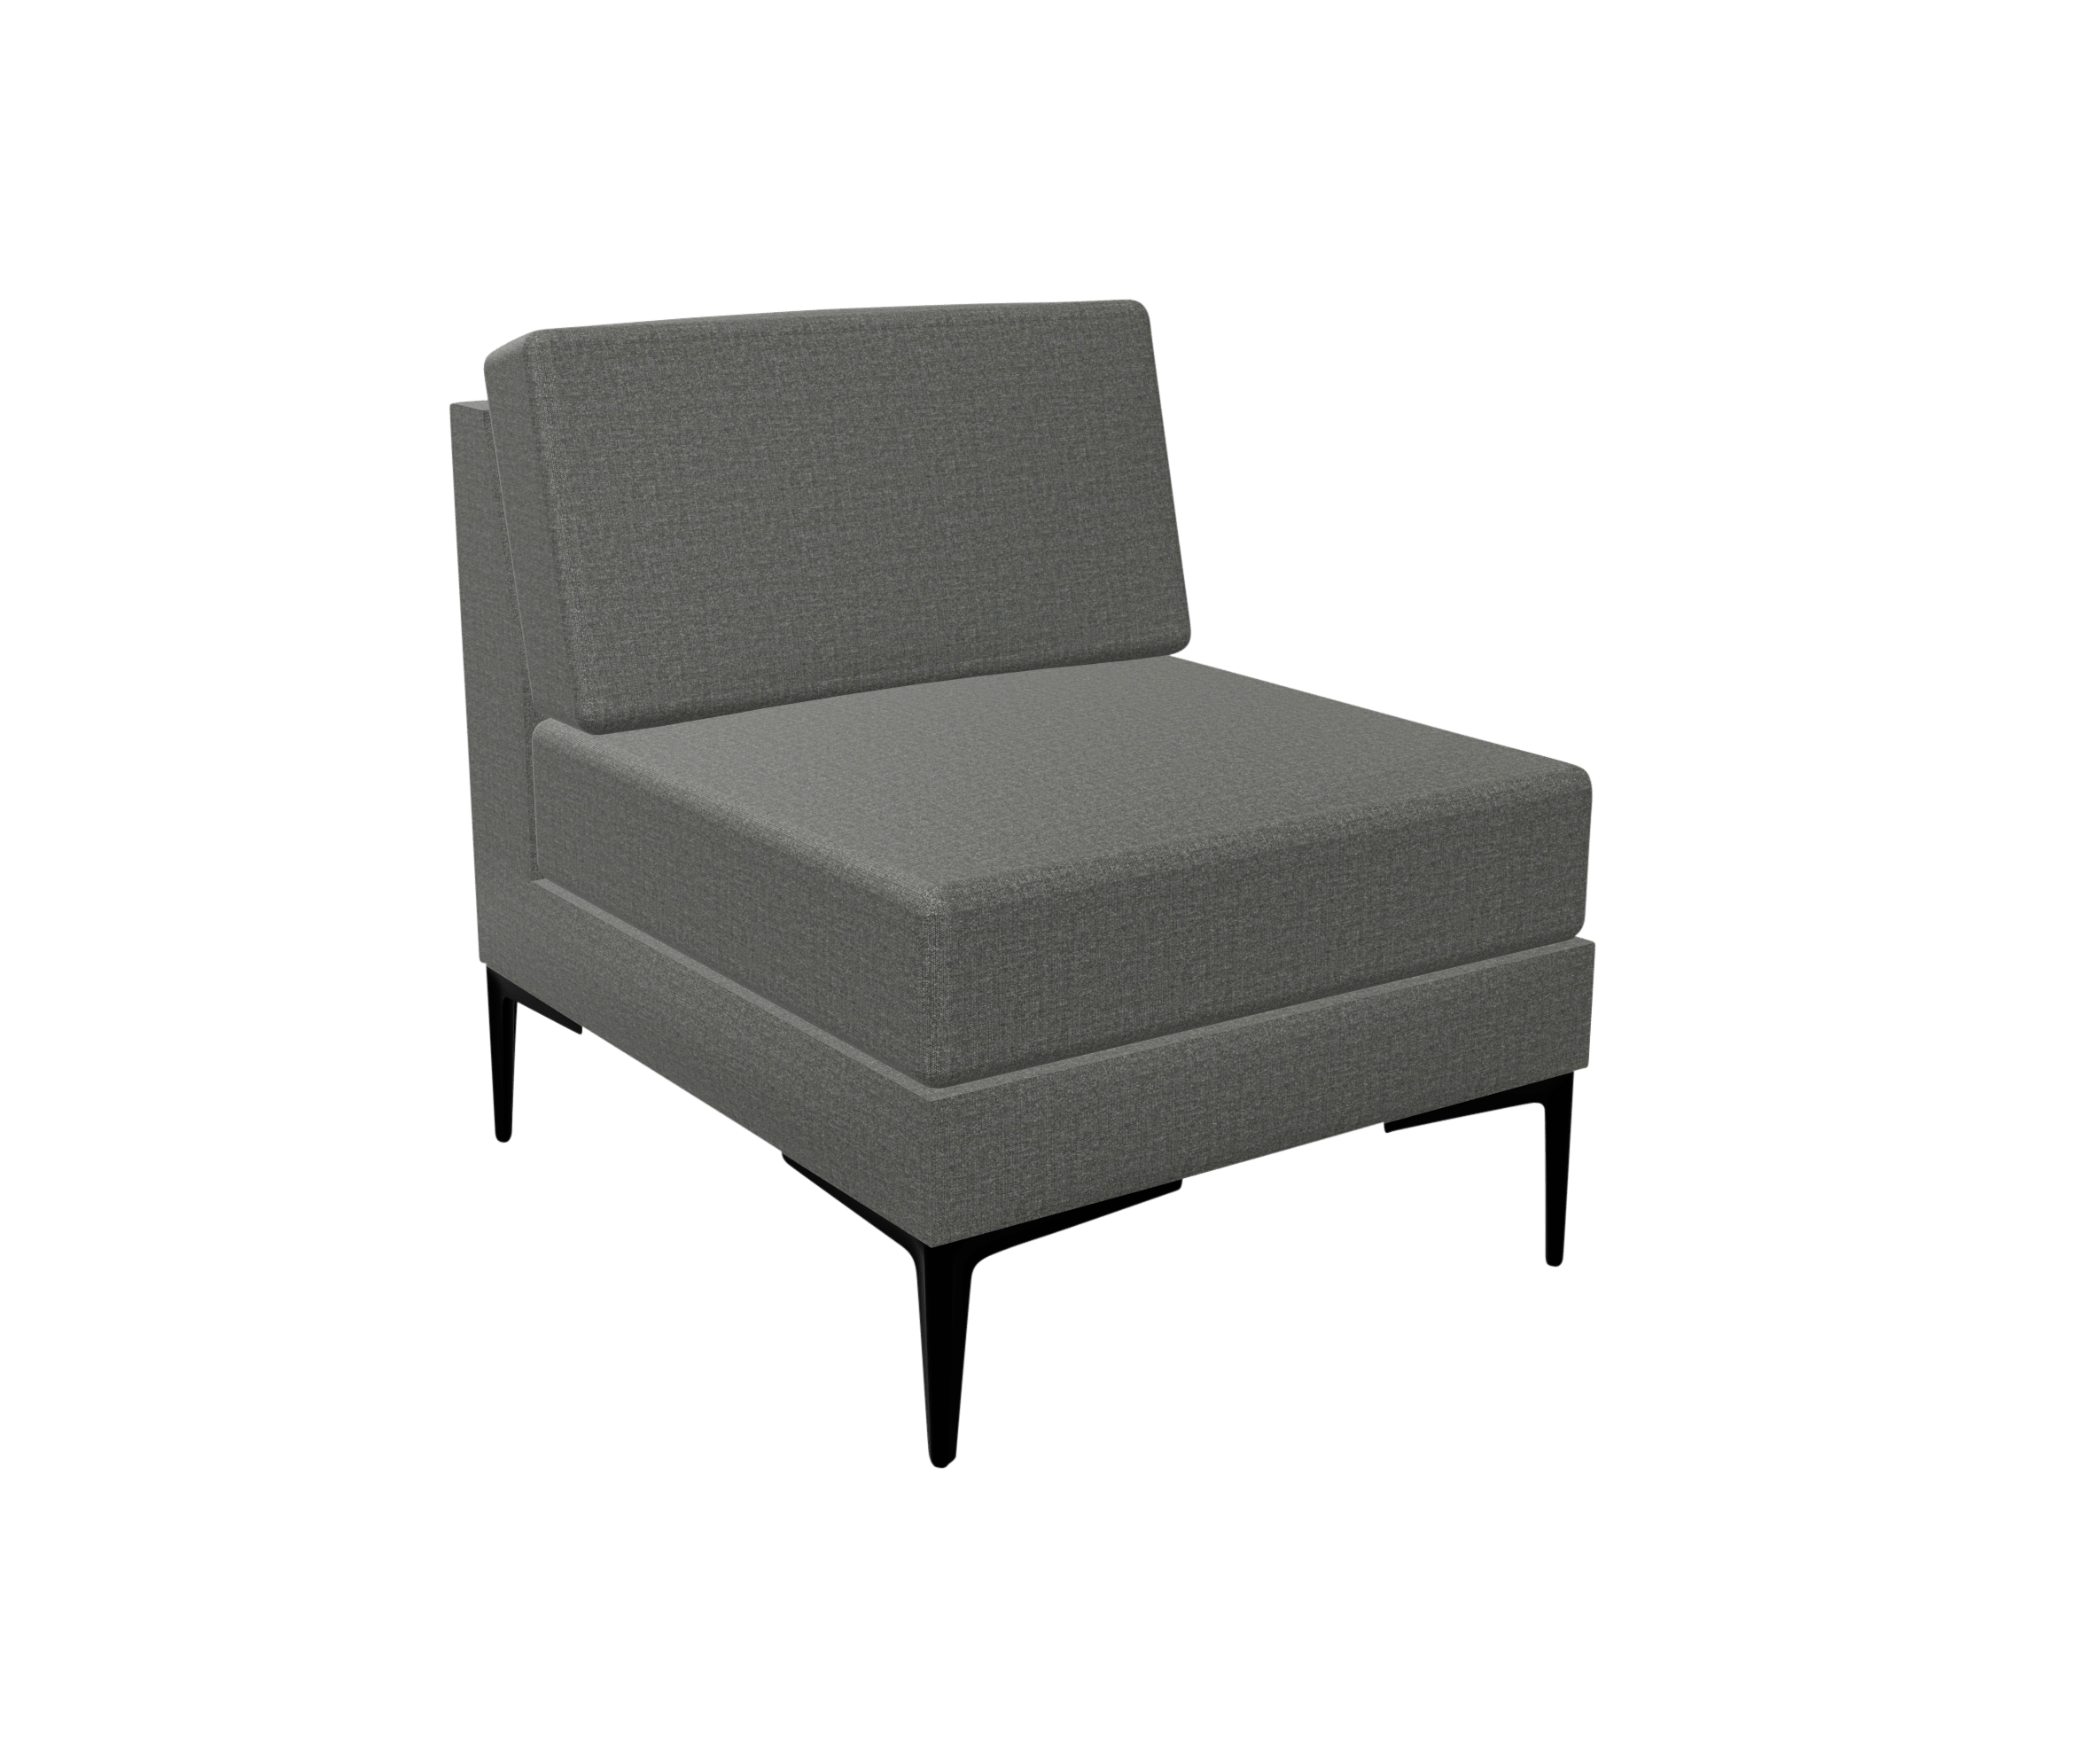 A grey office sofa with black legs.